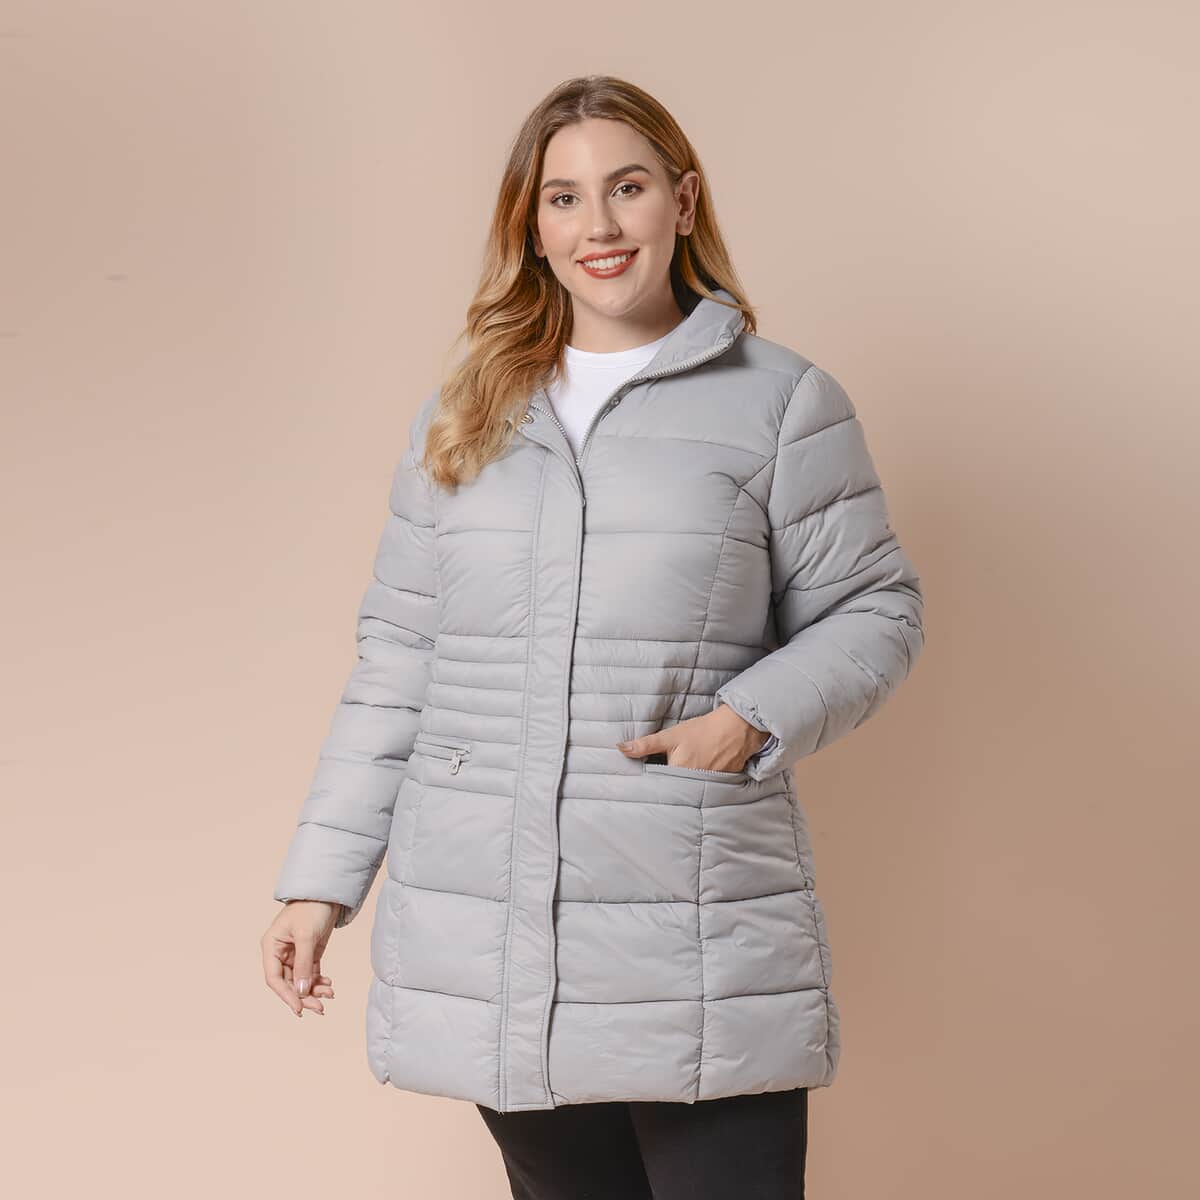 Passage Light Gray Long Sleeve Women Coat with 2 Zipper Pocket (XXL, Shell: 100% Nylon and Lining: 100% Polyester) image number 0